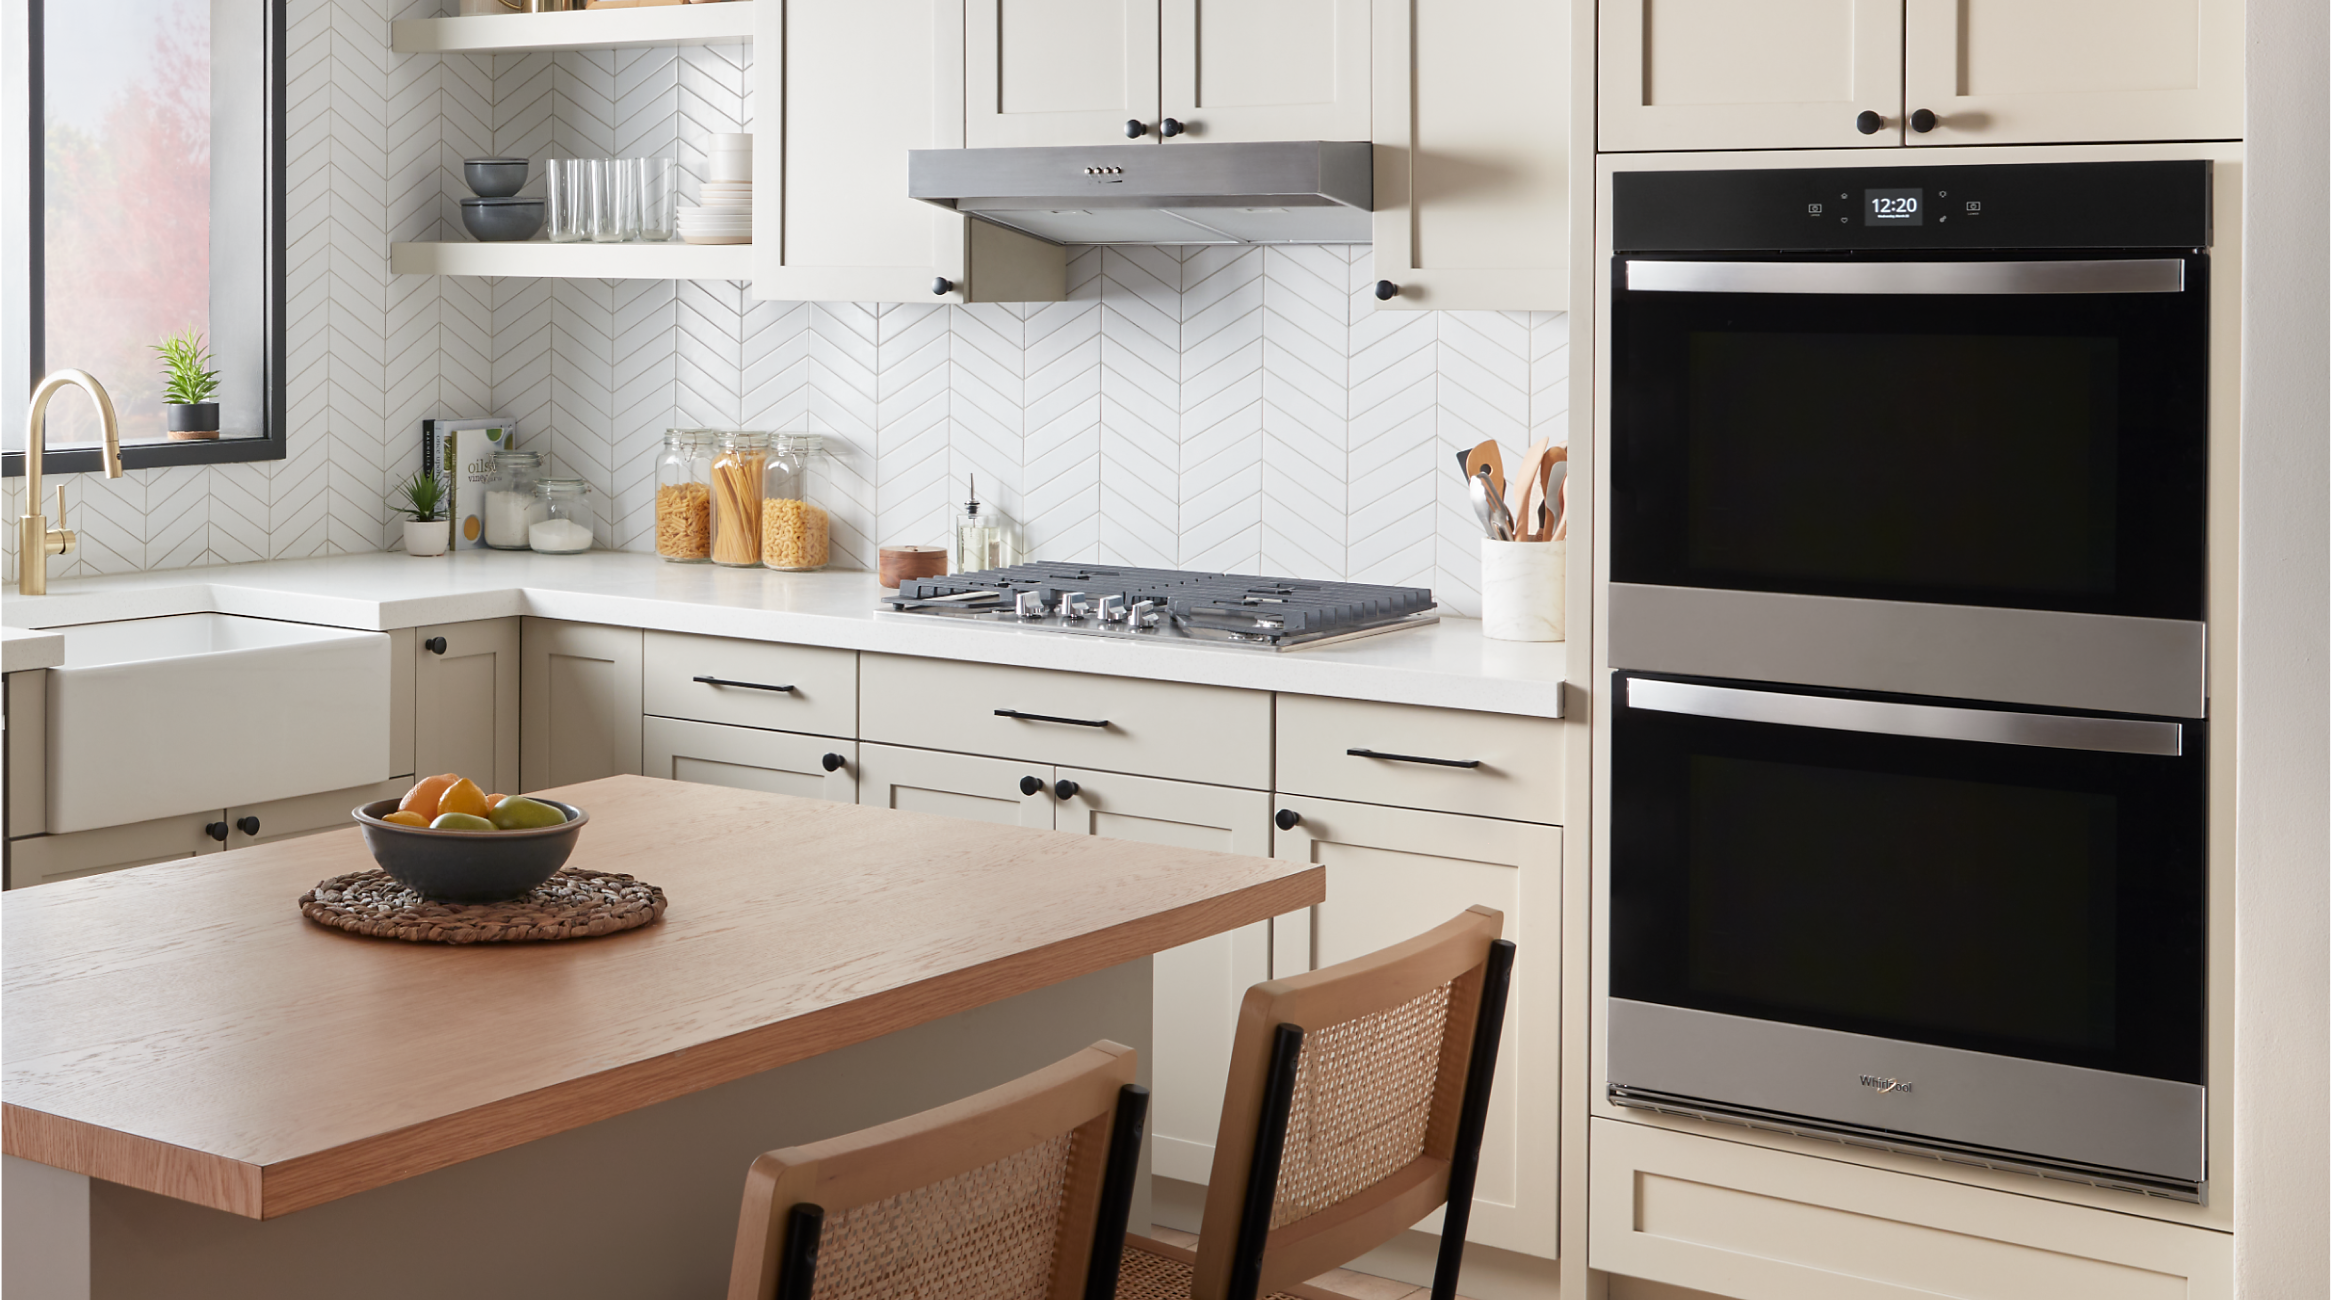 A Whirlpool® Smart Double Wall Oven, Gas Cooktop and Range Hood in a kitchen with light cabinets and an island